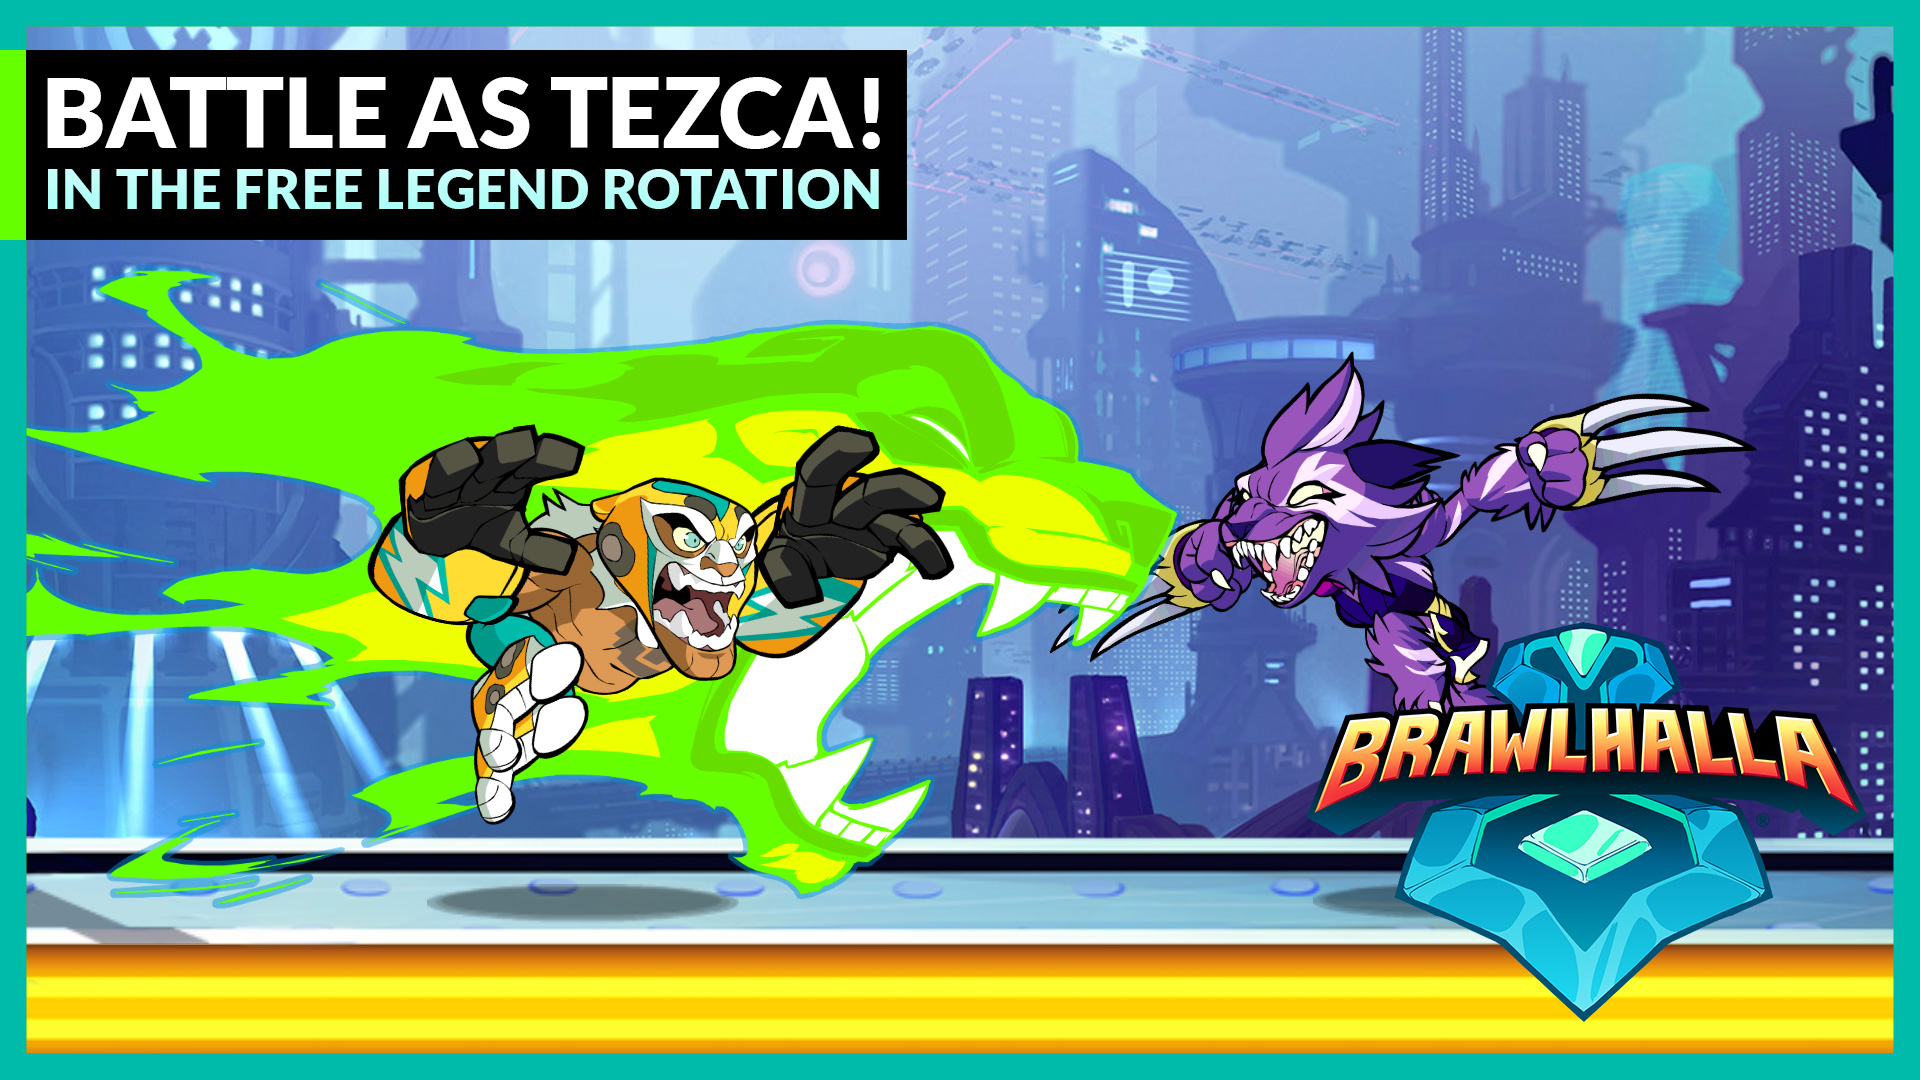 Tezca Makes the Rules in the Free Legend Rotation!